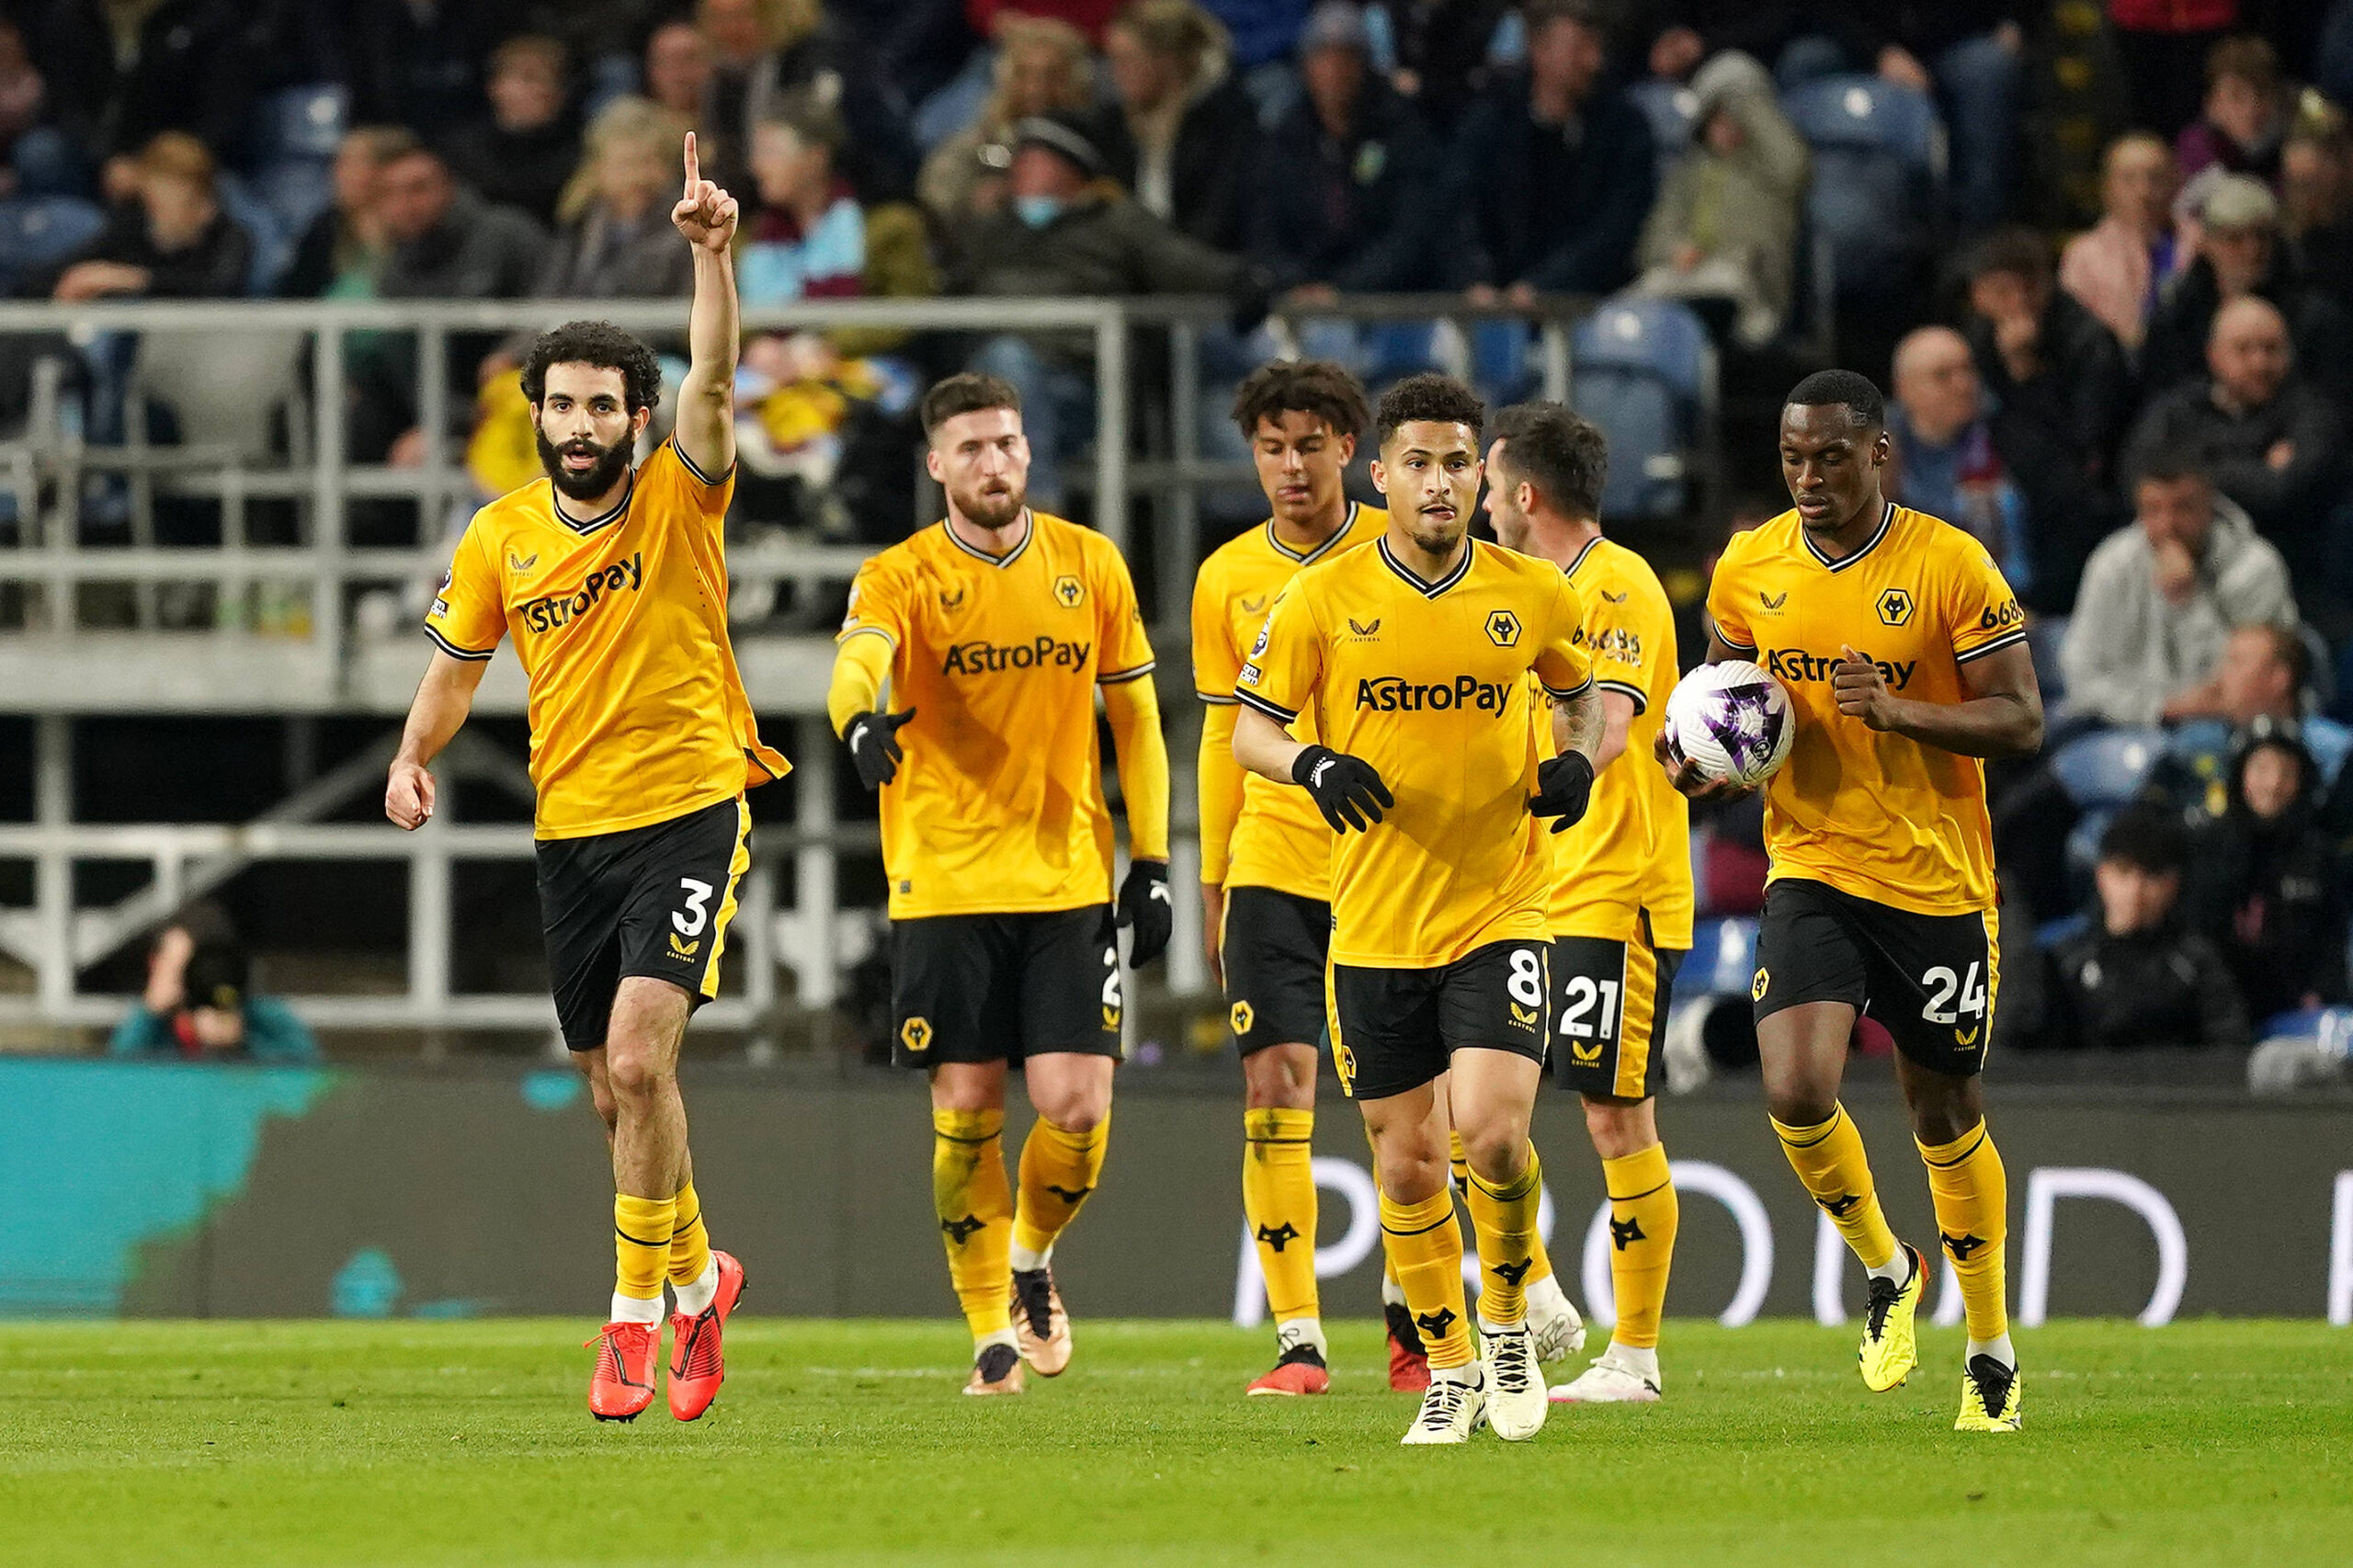 Rayan Ait-Nouri celebrates with his Wolves team-mates after scoring against Burnley